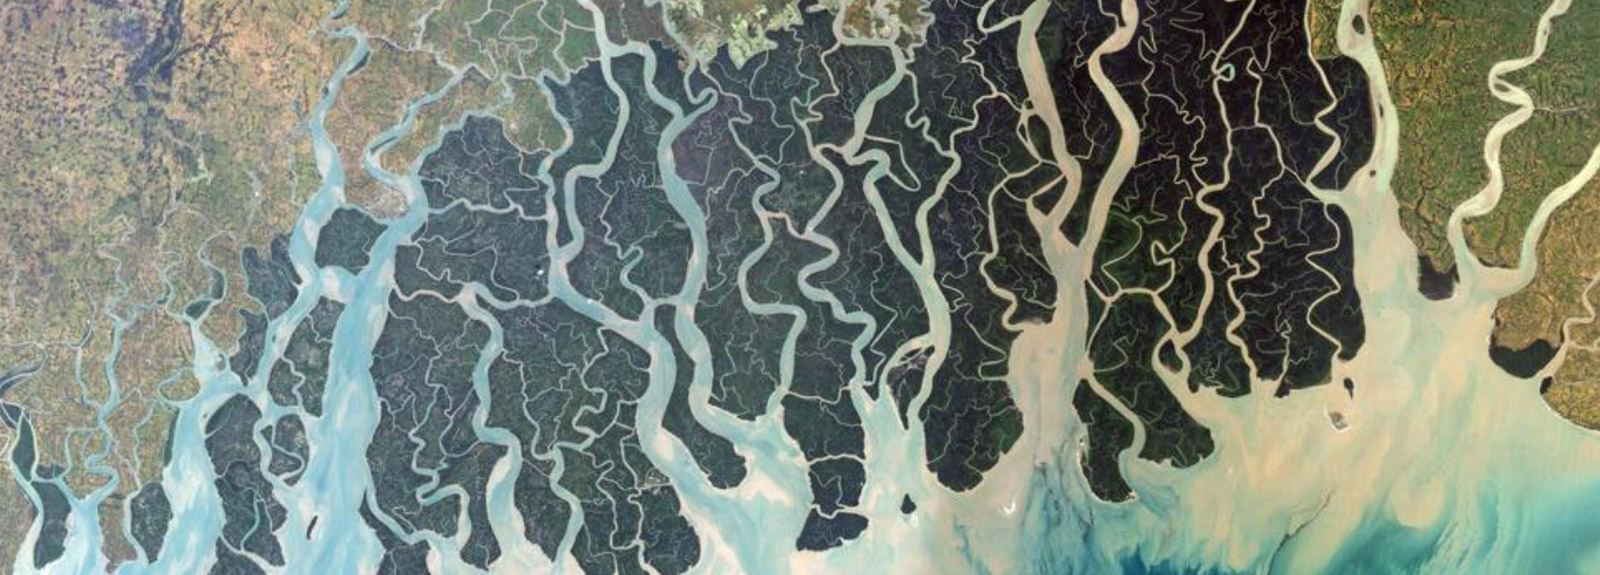 Sundarbans from space